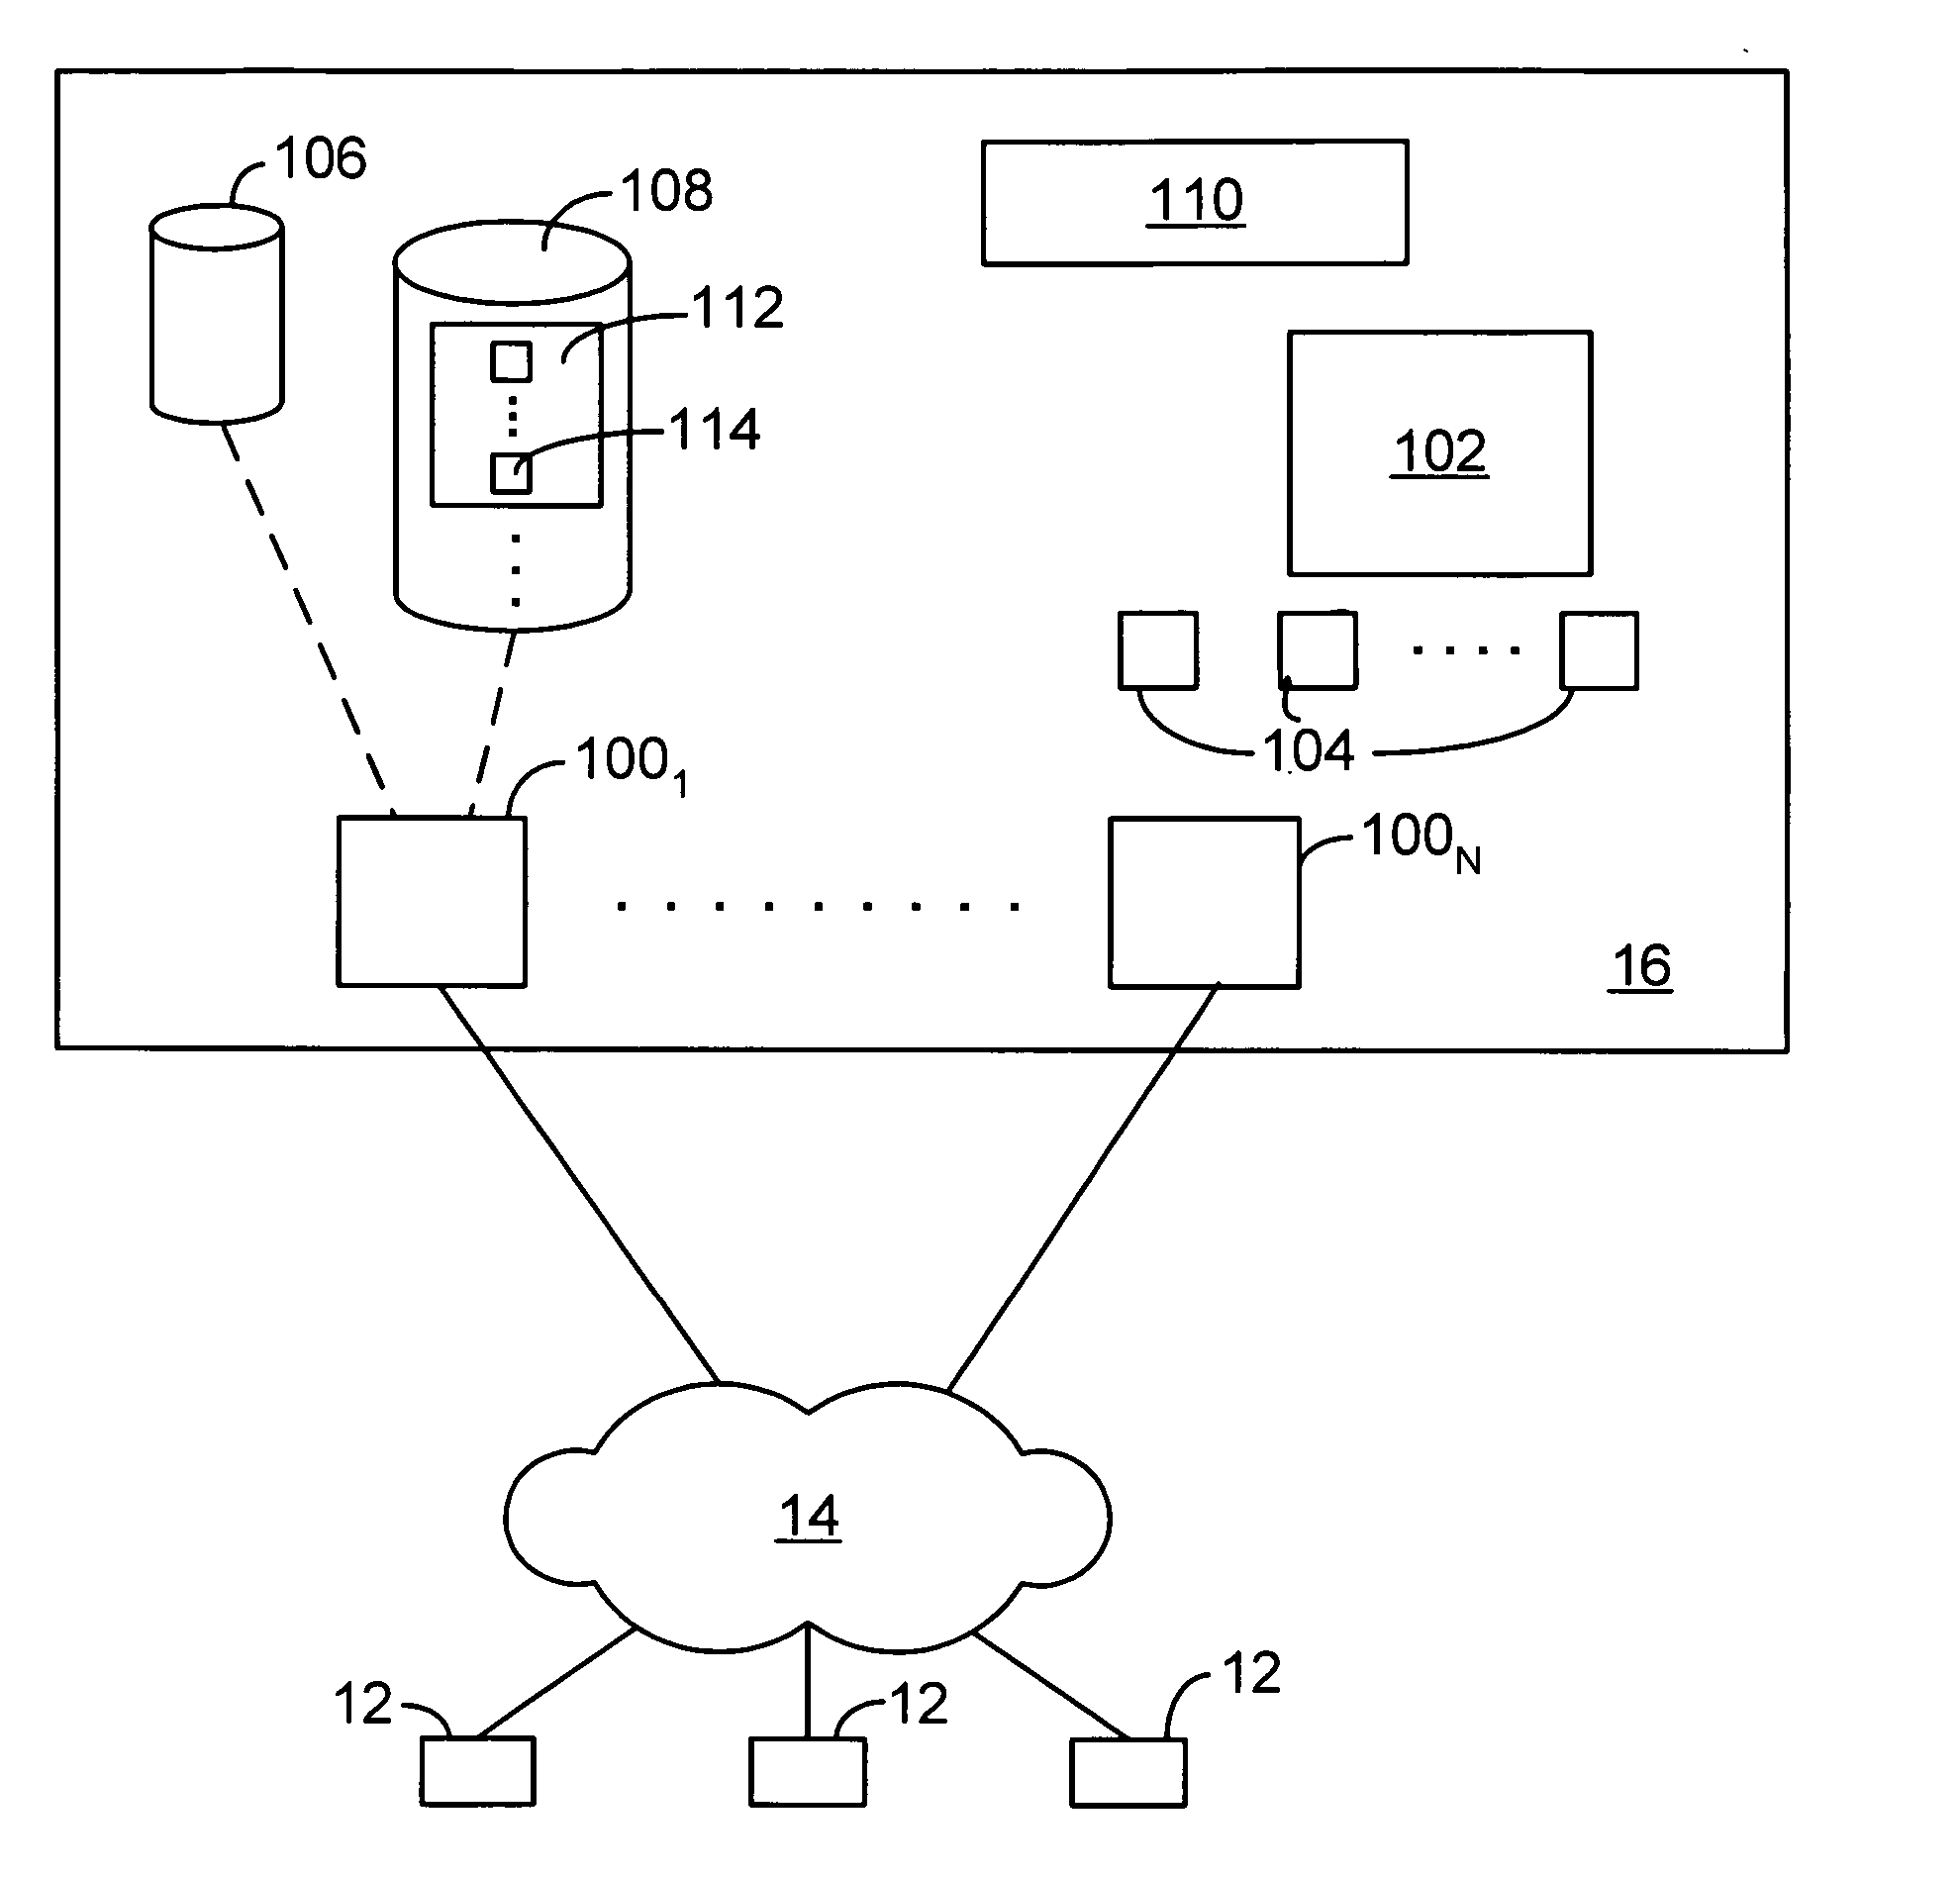 Methods and systems for optimizing text searches over structured data in a multi-tenant environment